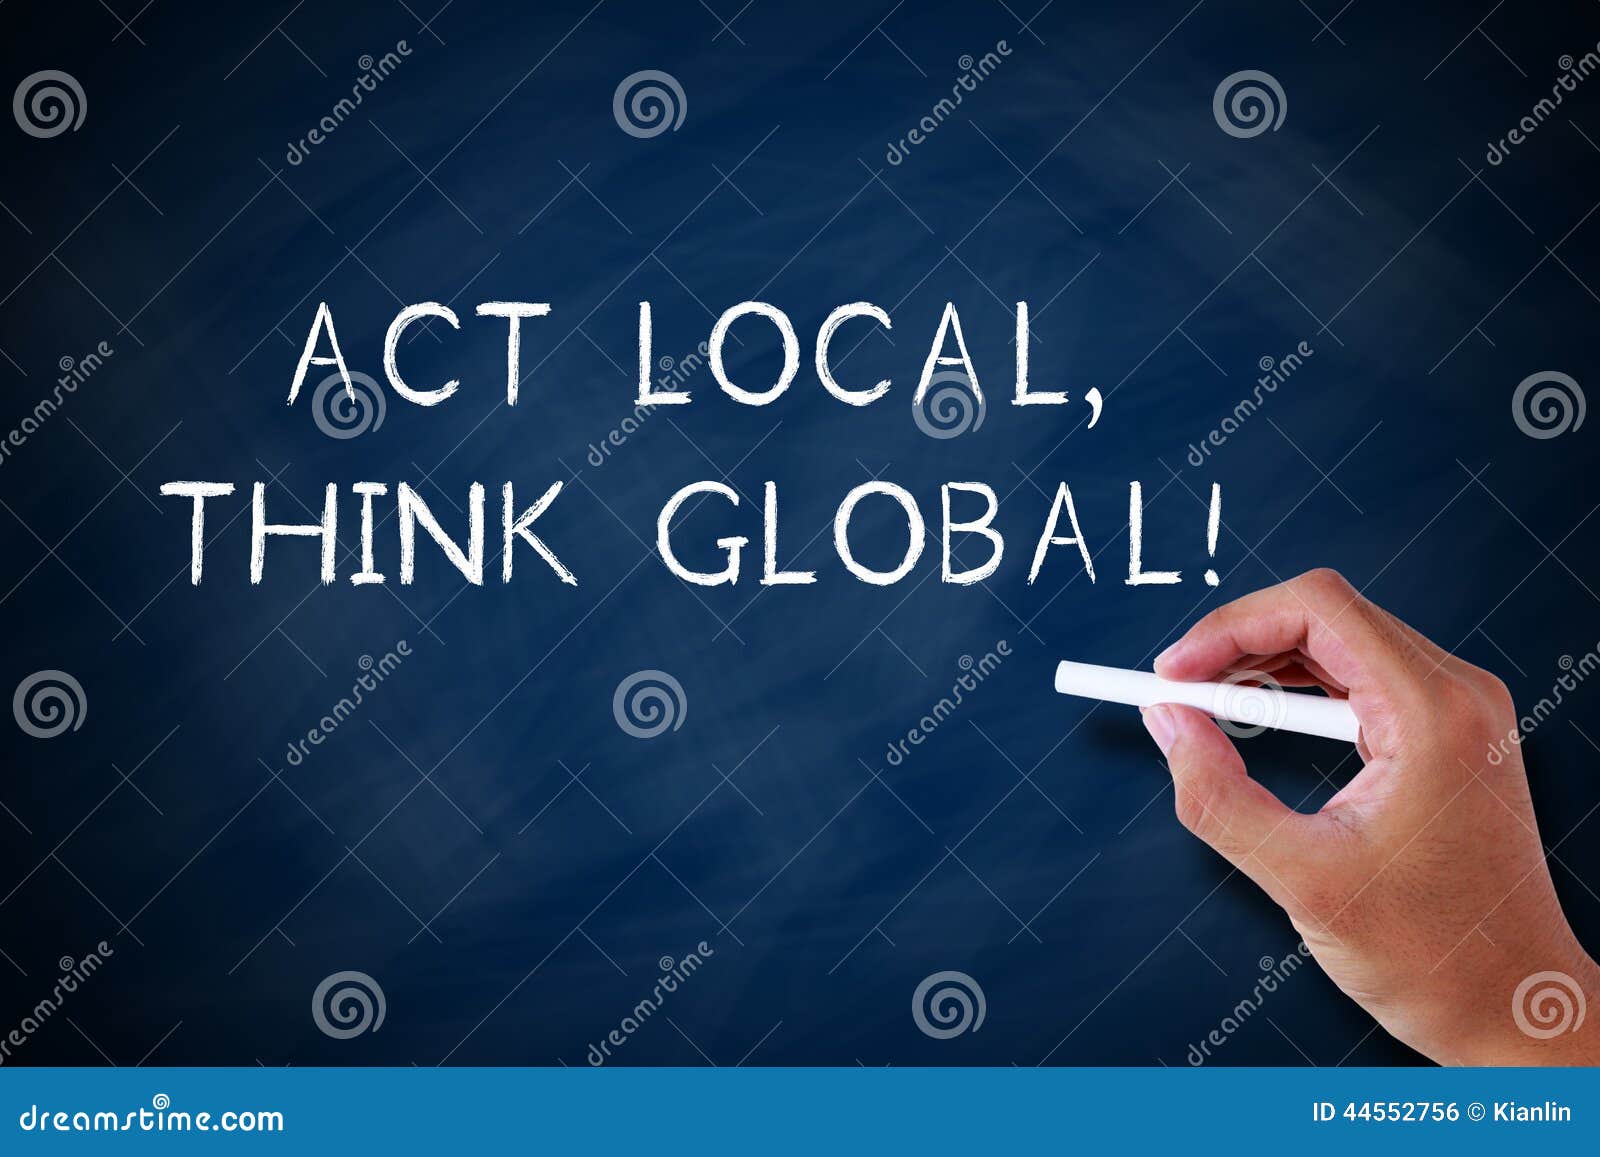 act local and think global